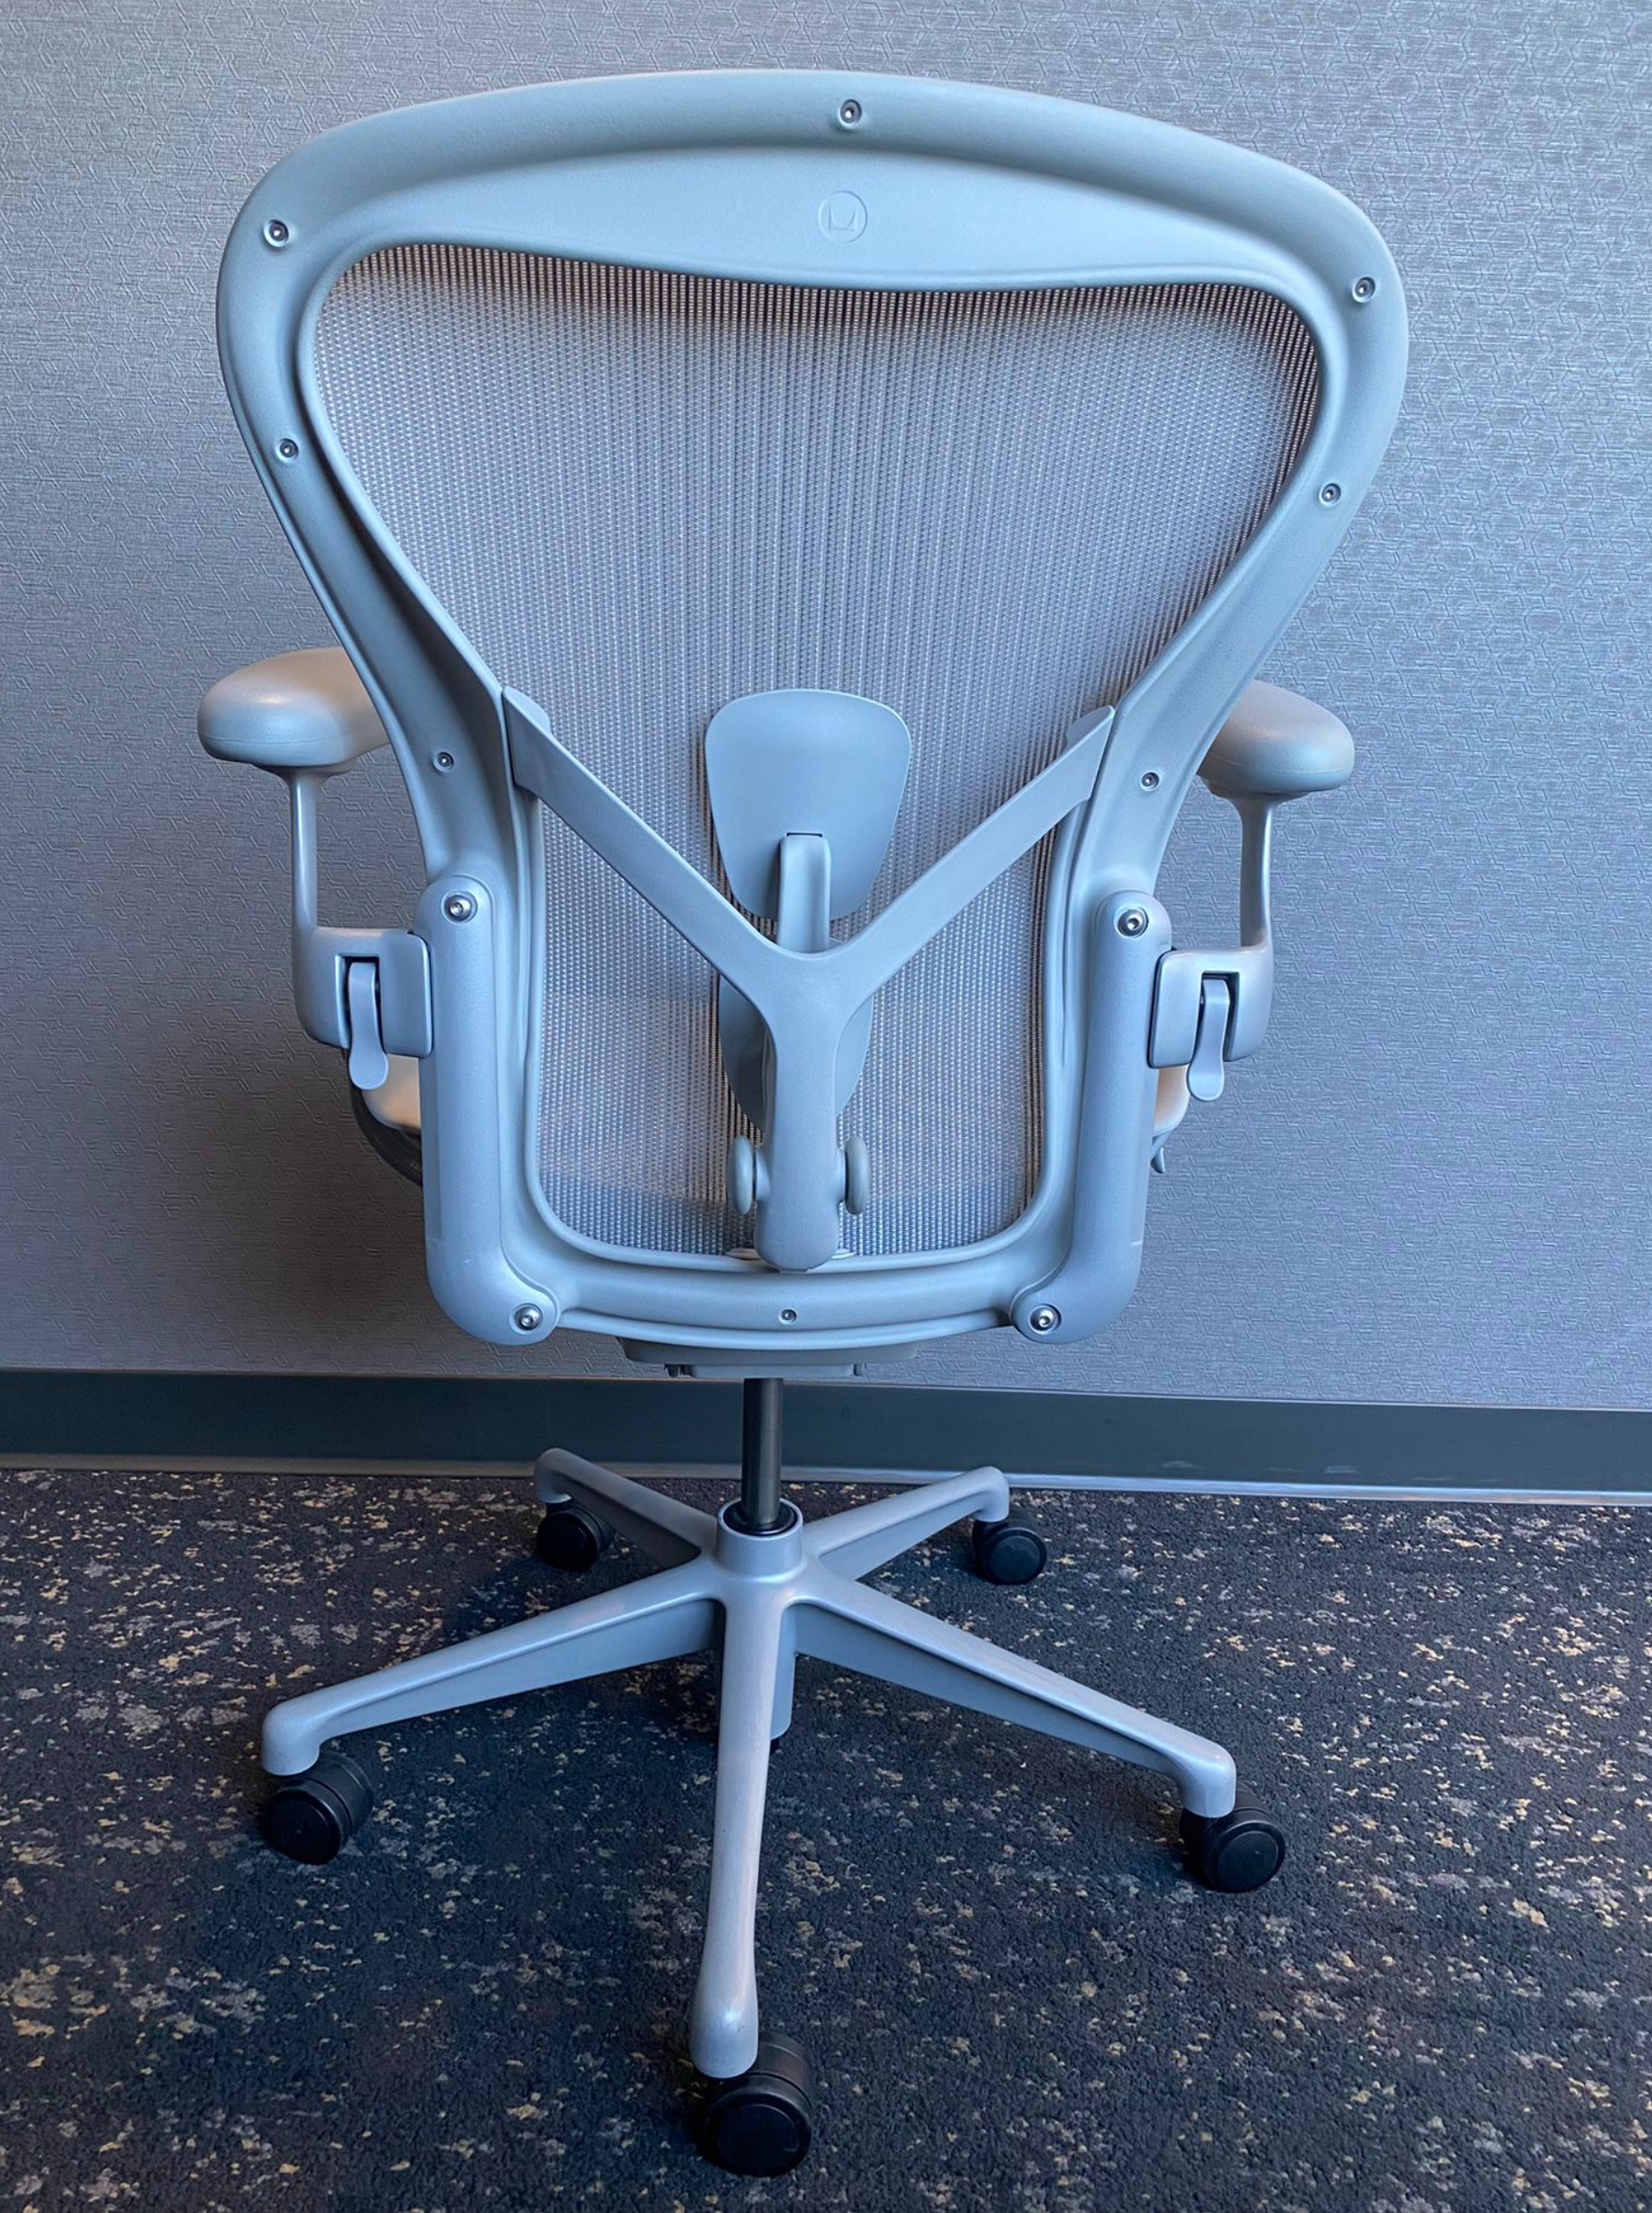 Aeron Herman Miller Office Chair Size B Fully with Posture Fit